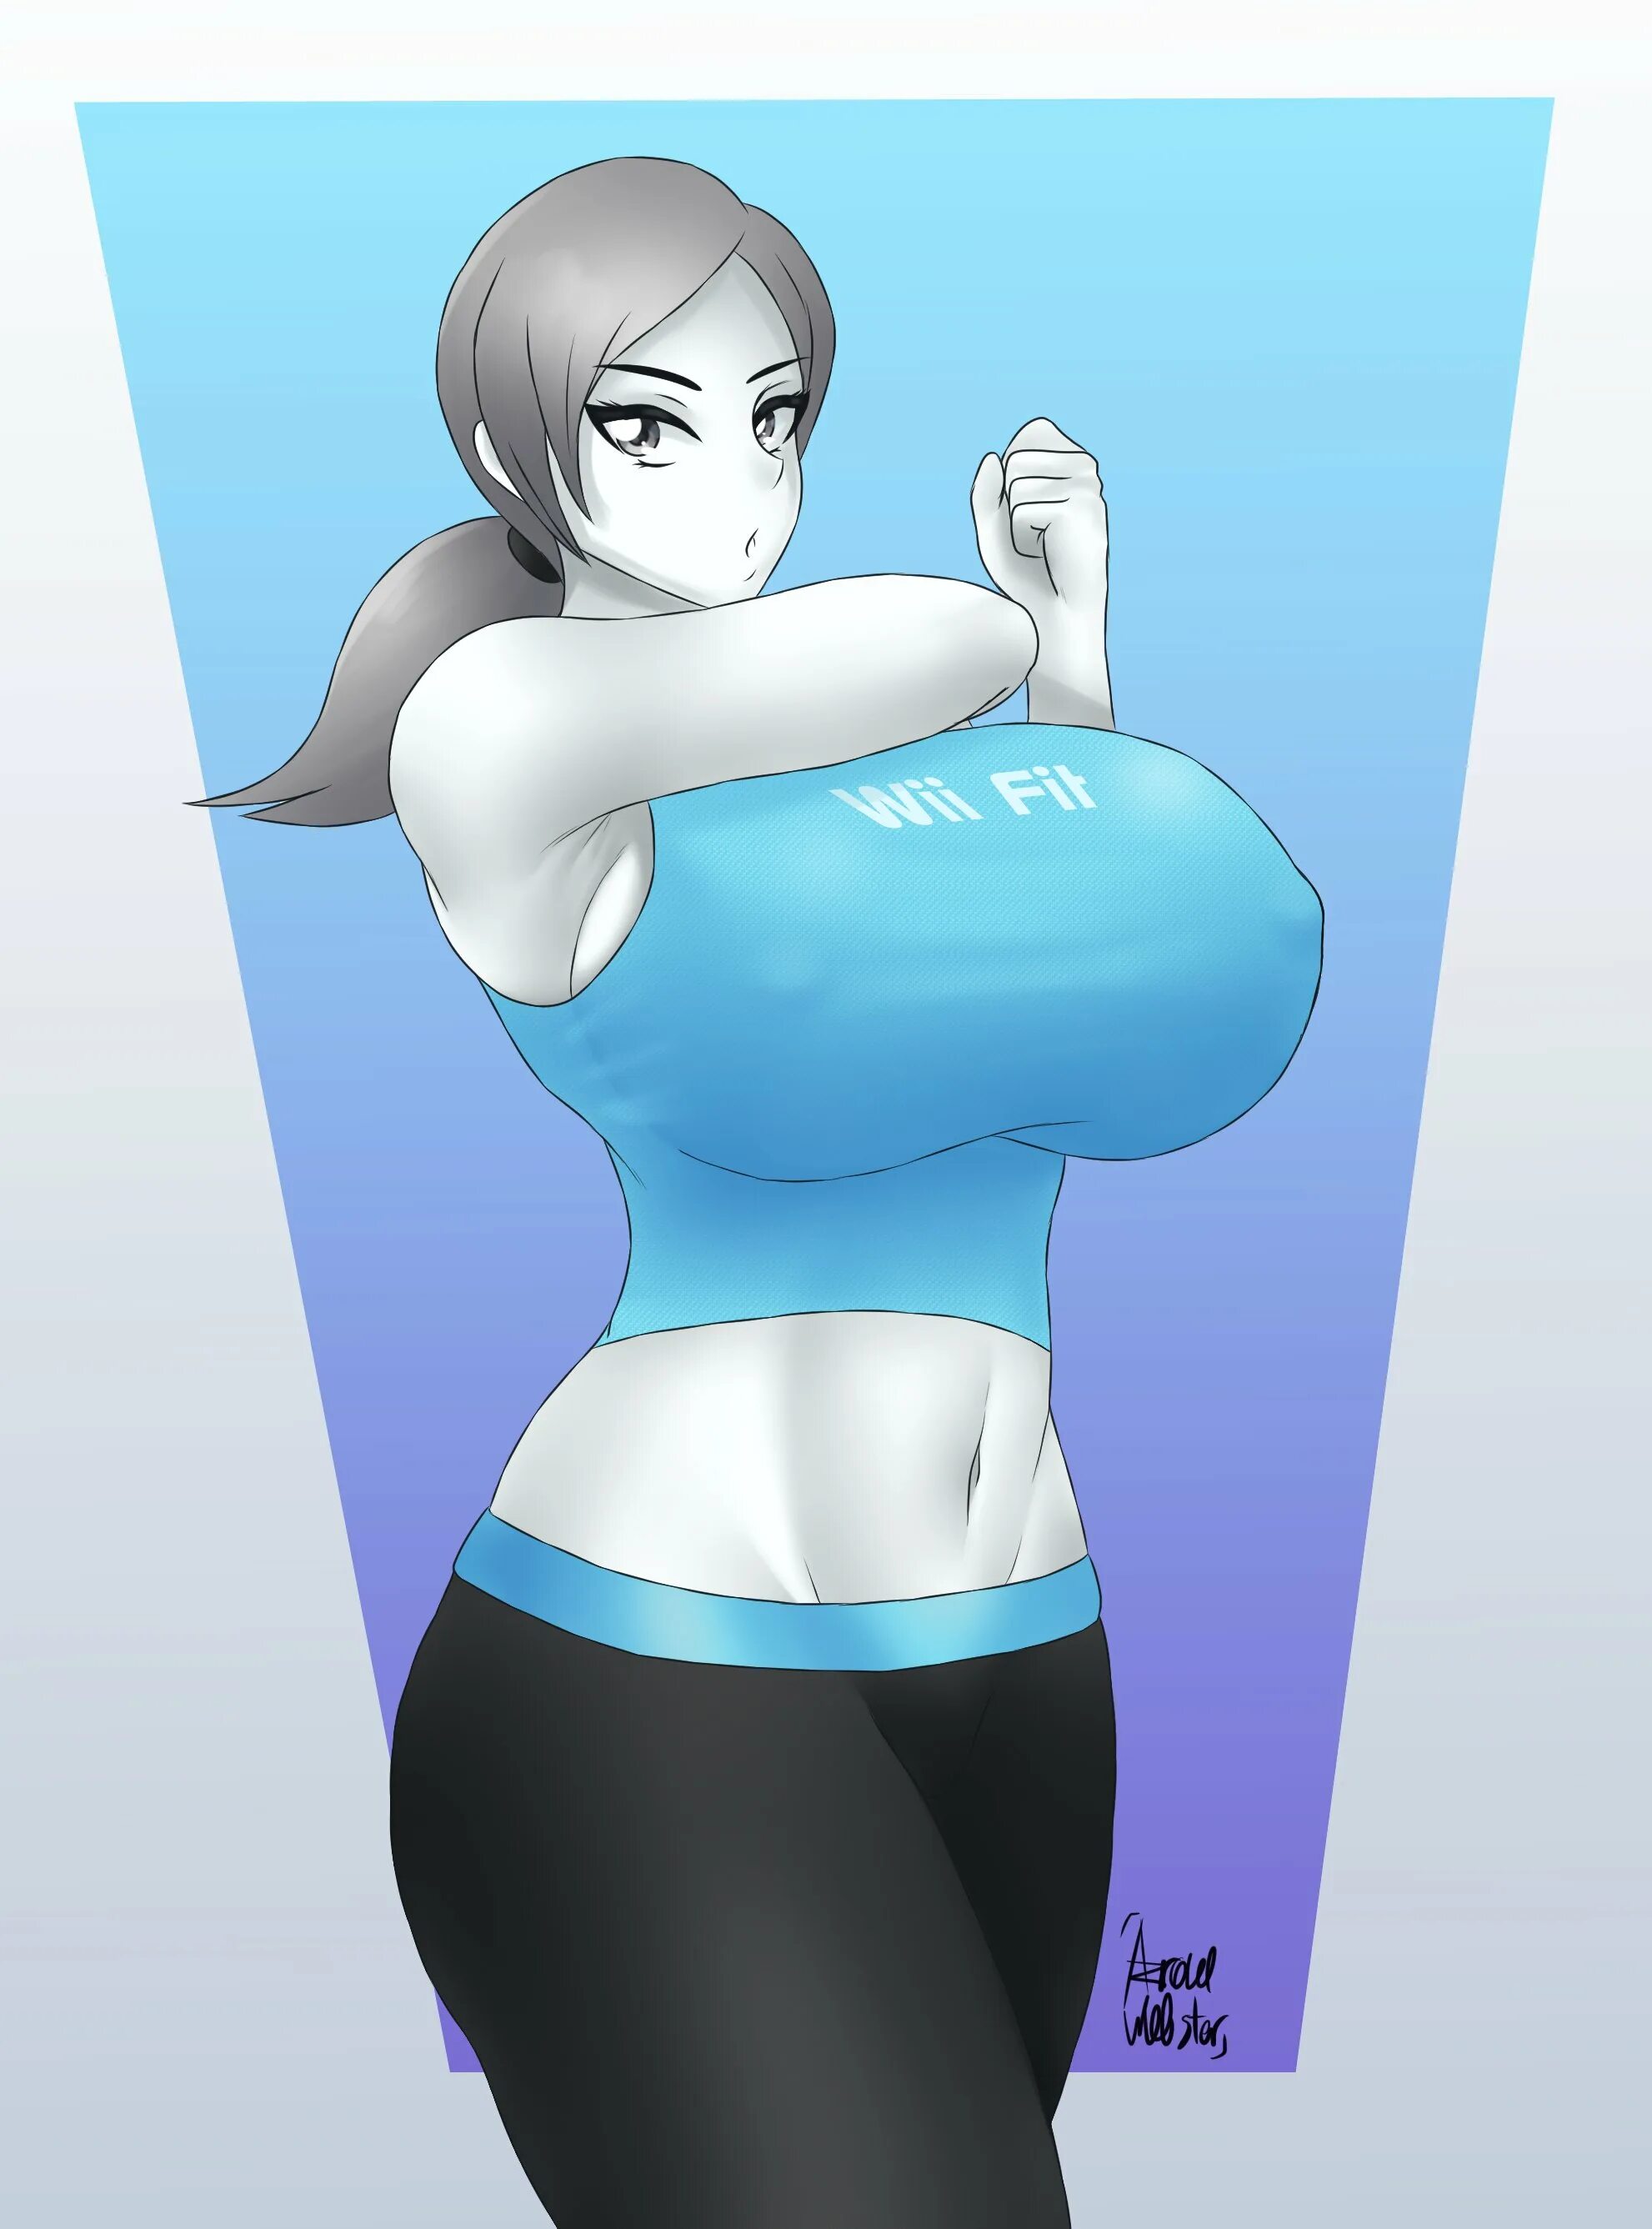 Wii Fit Trainer. Wii Fit Trainer 34. Wii Fit Trainer арт. Wii Fit Trainer эччи.